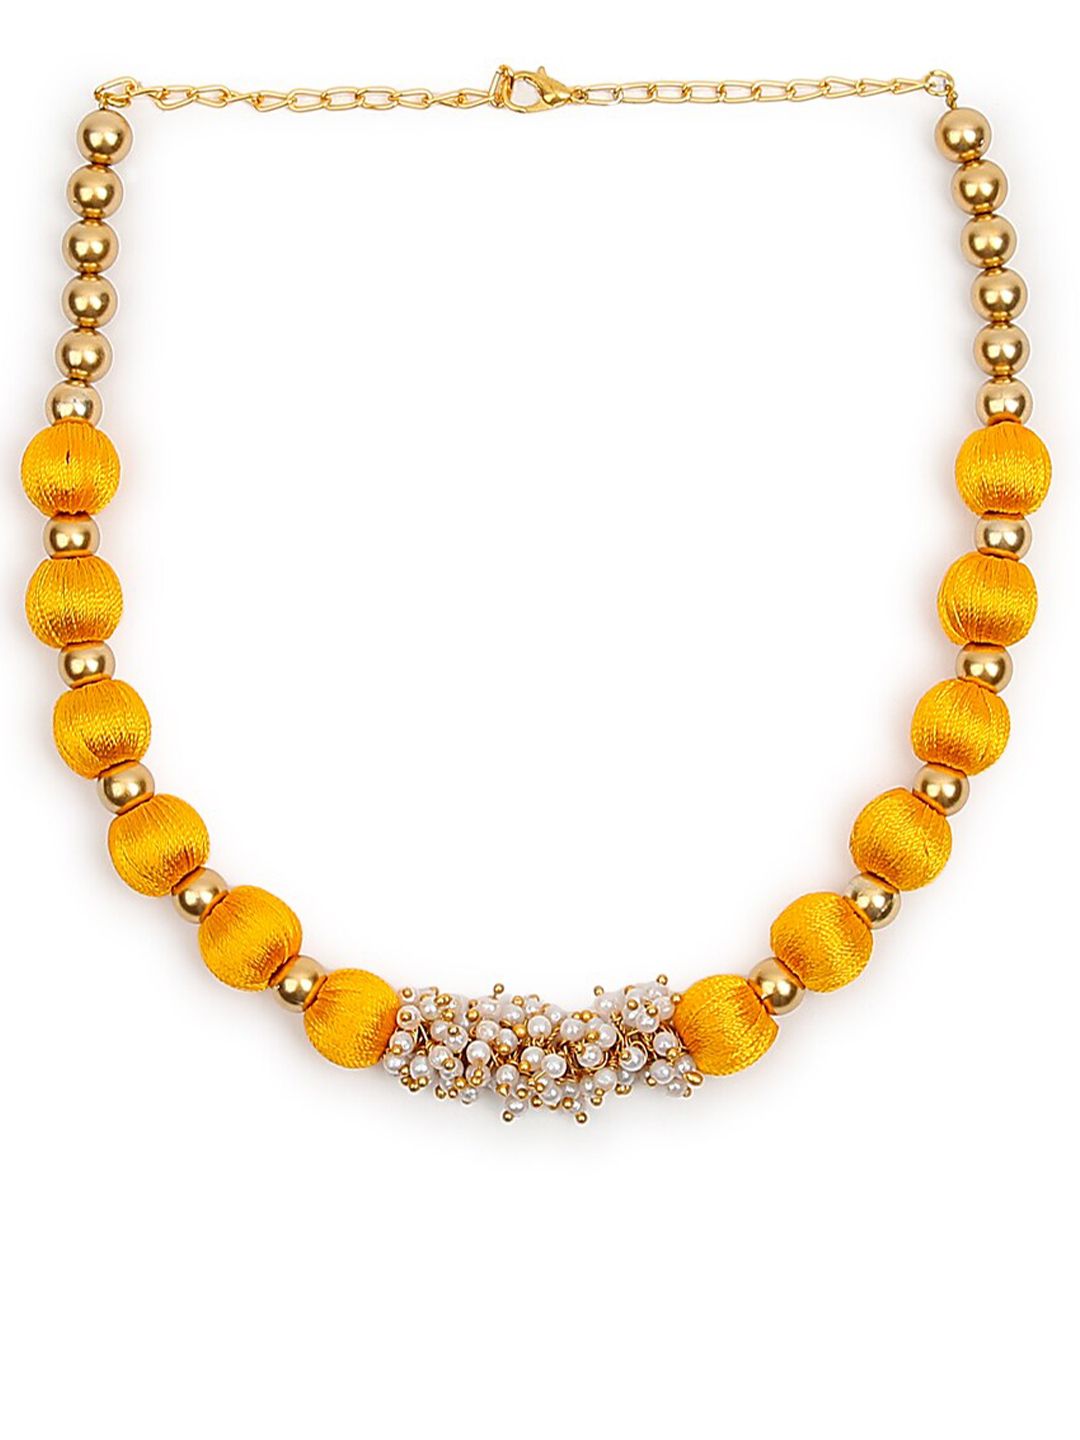 AKSHARA Gold-Toned & Yellow Choker Necklace Price in India